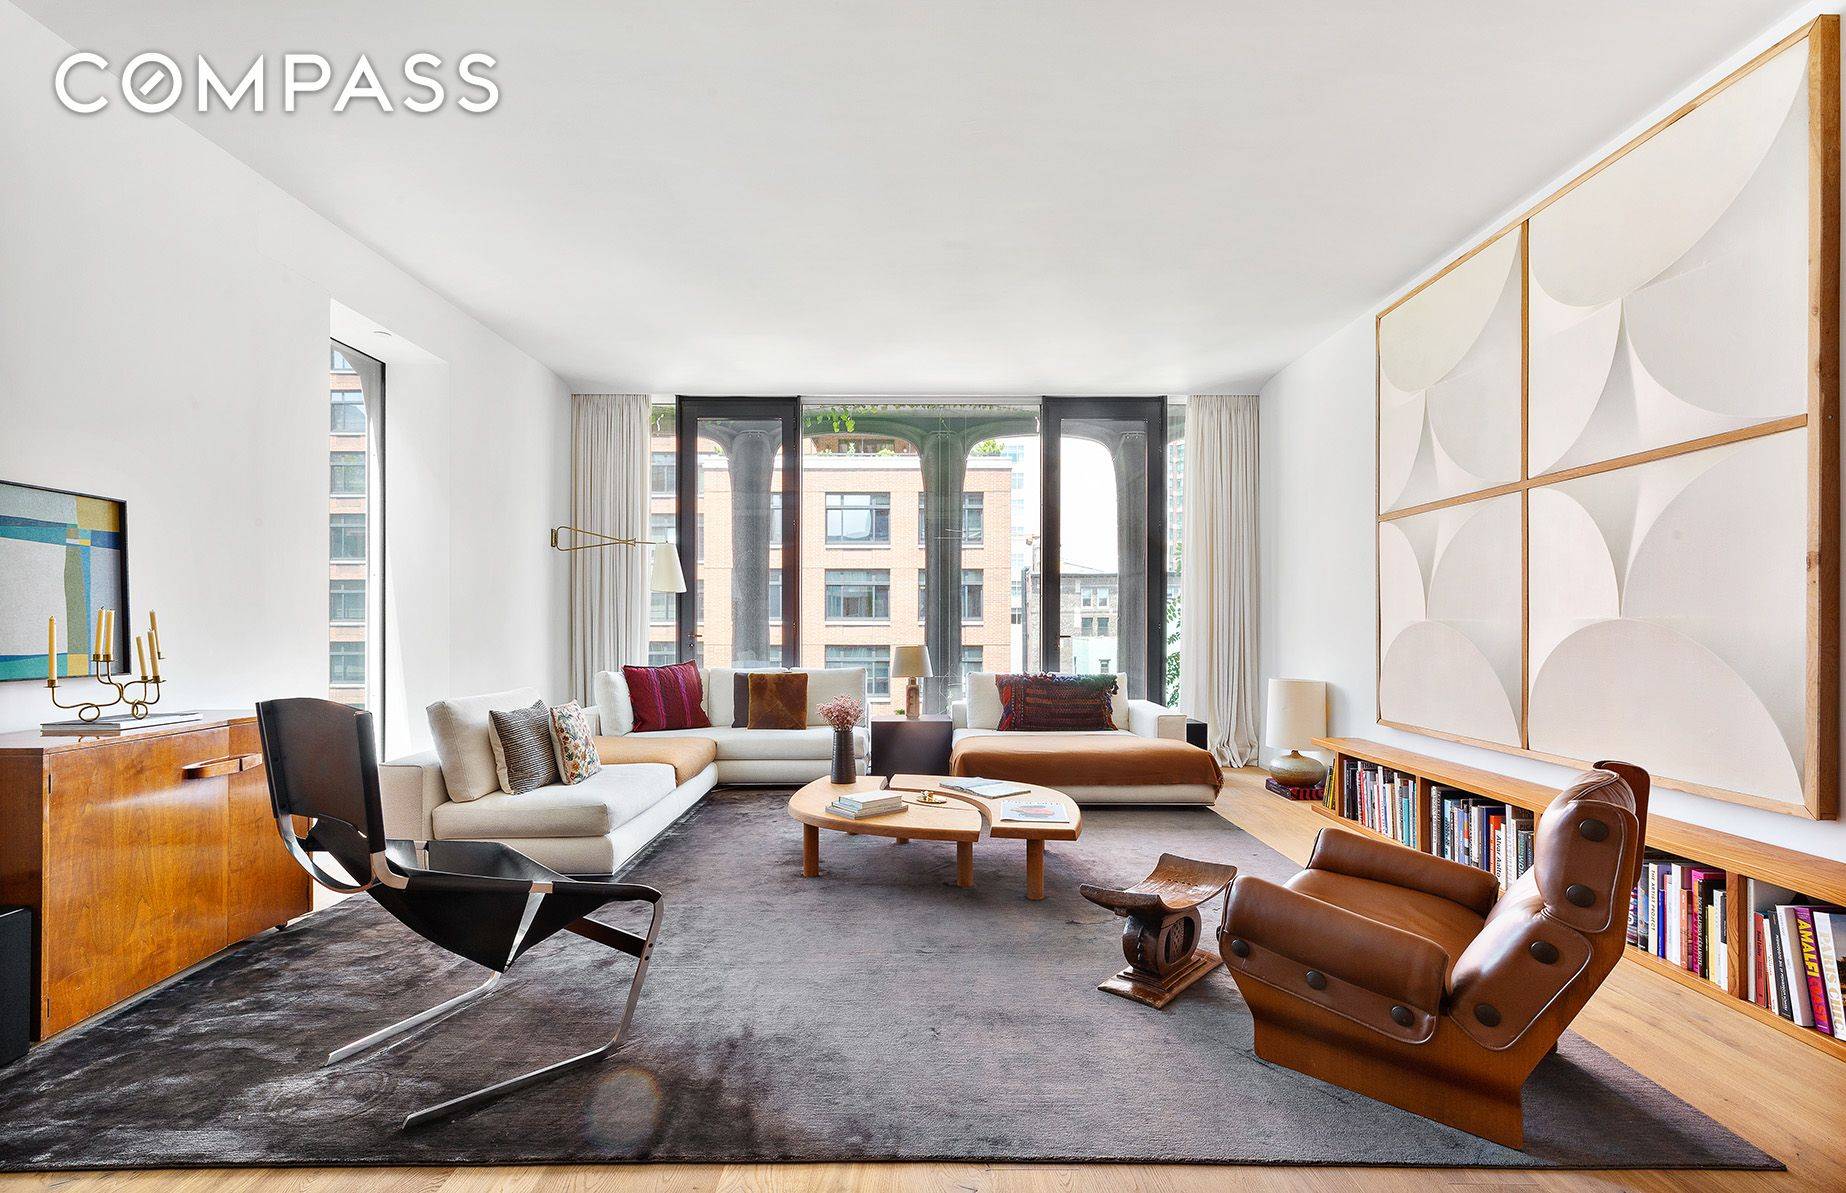 Haute designed fully furnished rental in the heart of SoHo.